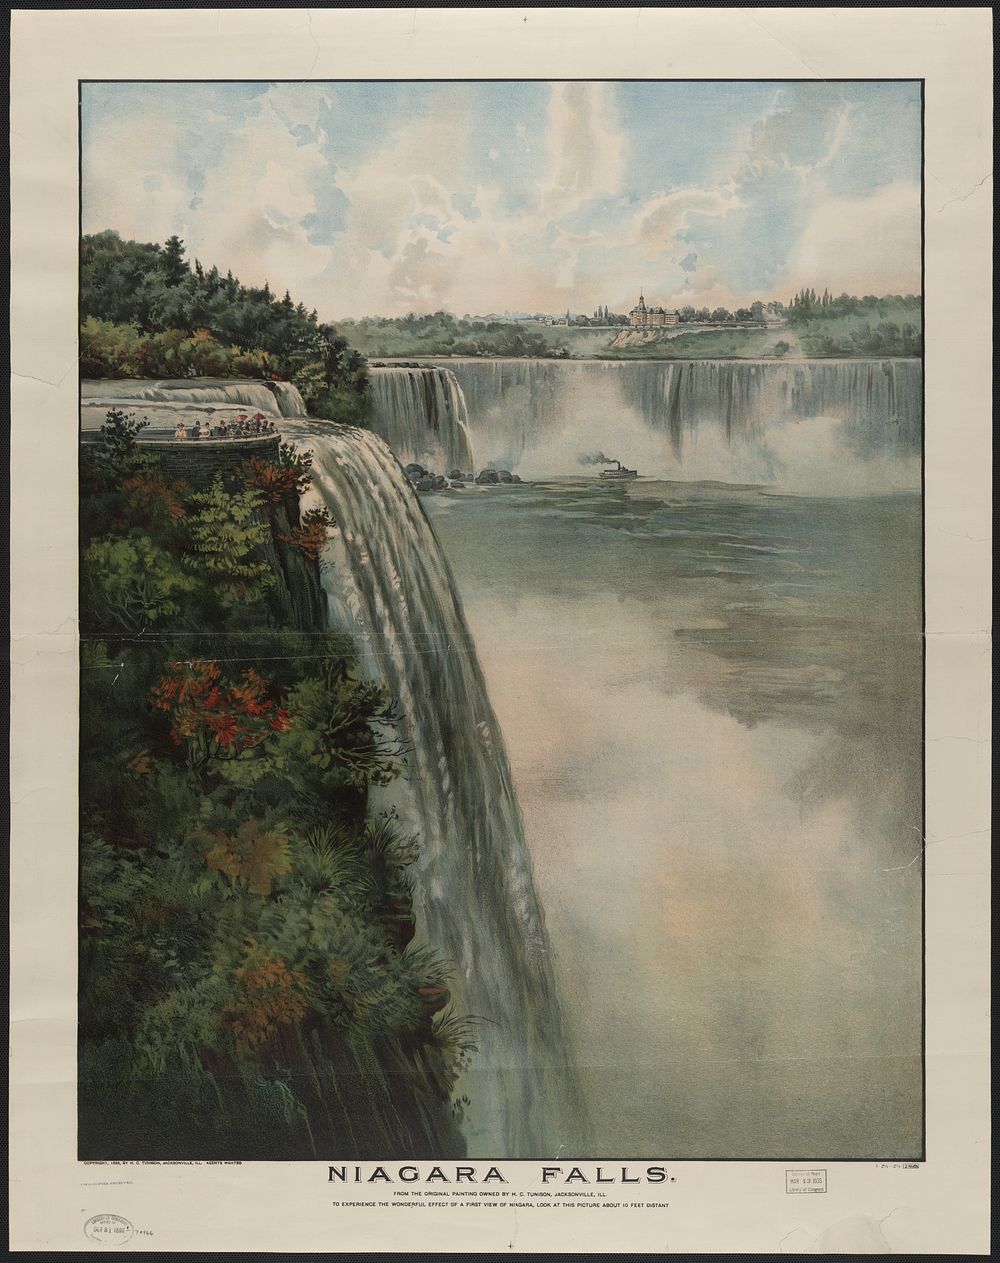 Niagara Falls / from the original painting owned by H.C. Tunison, Jacksonville, Ill.